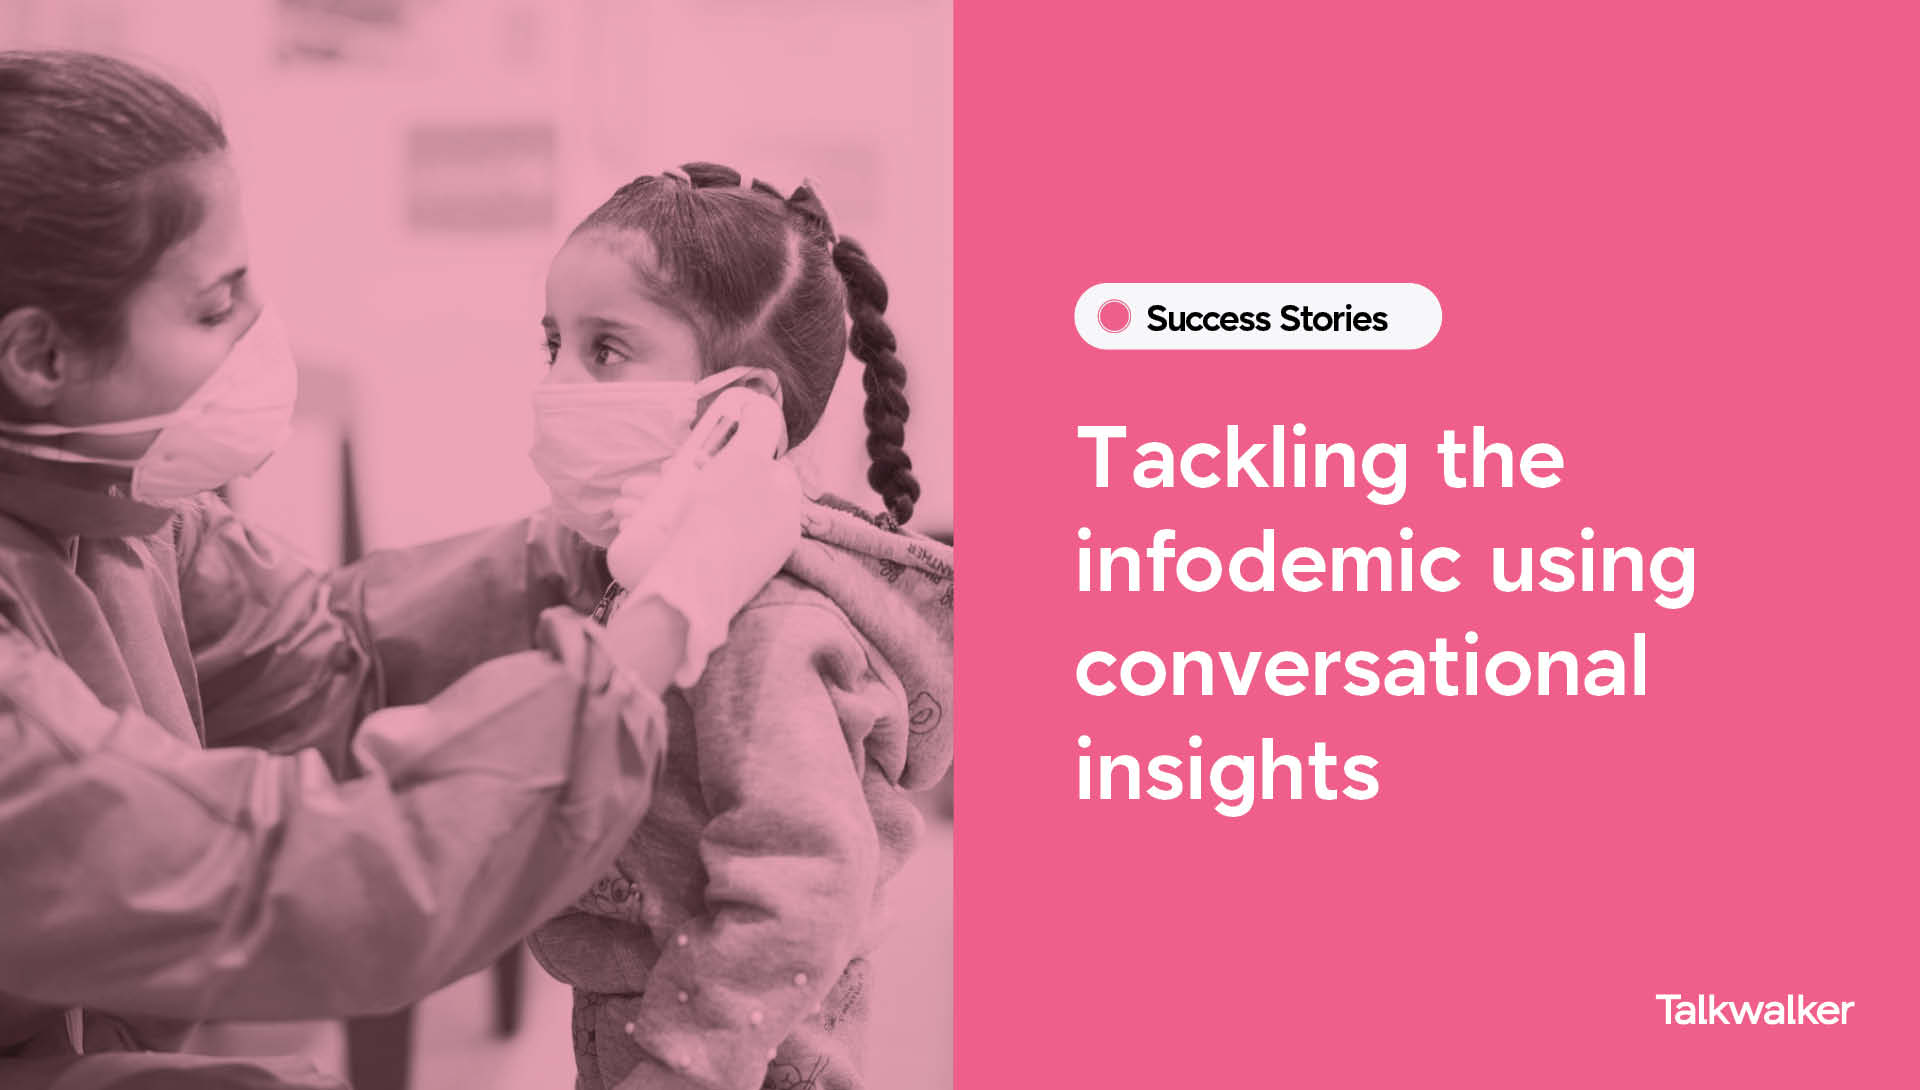 Tackling the infodemic using conversational insights - Case Study of UNICEF Response in MENA